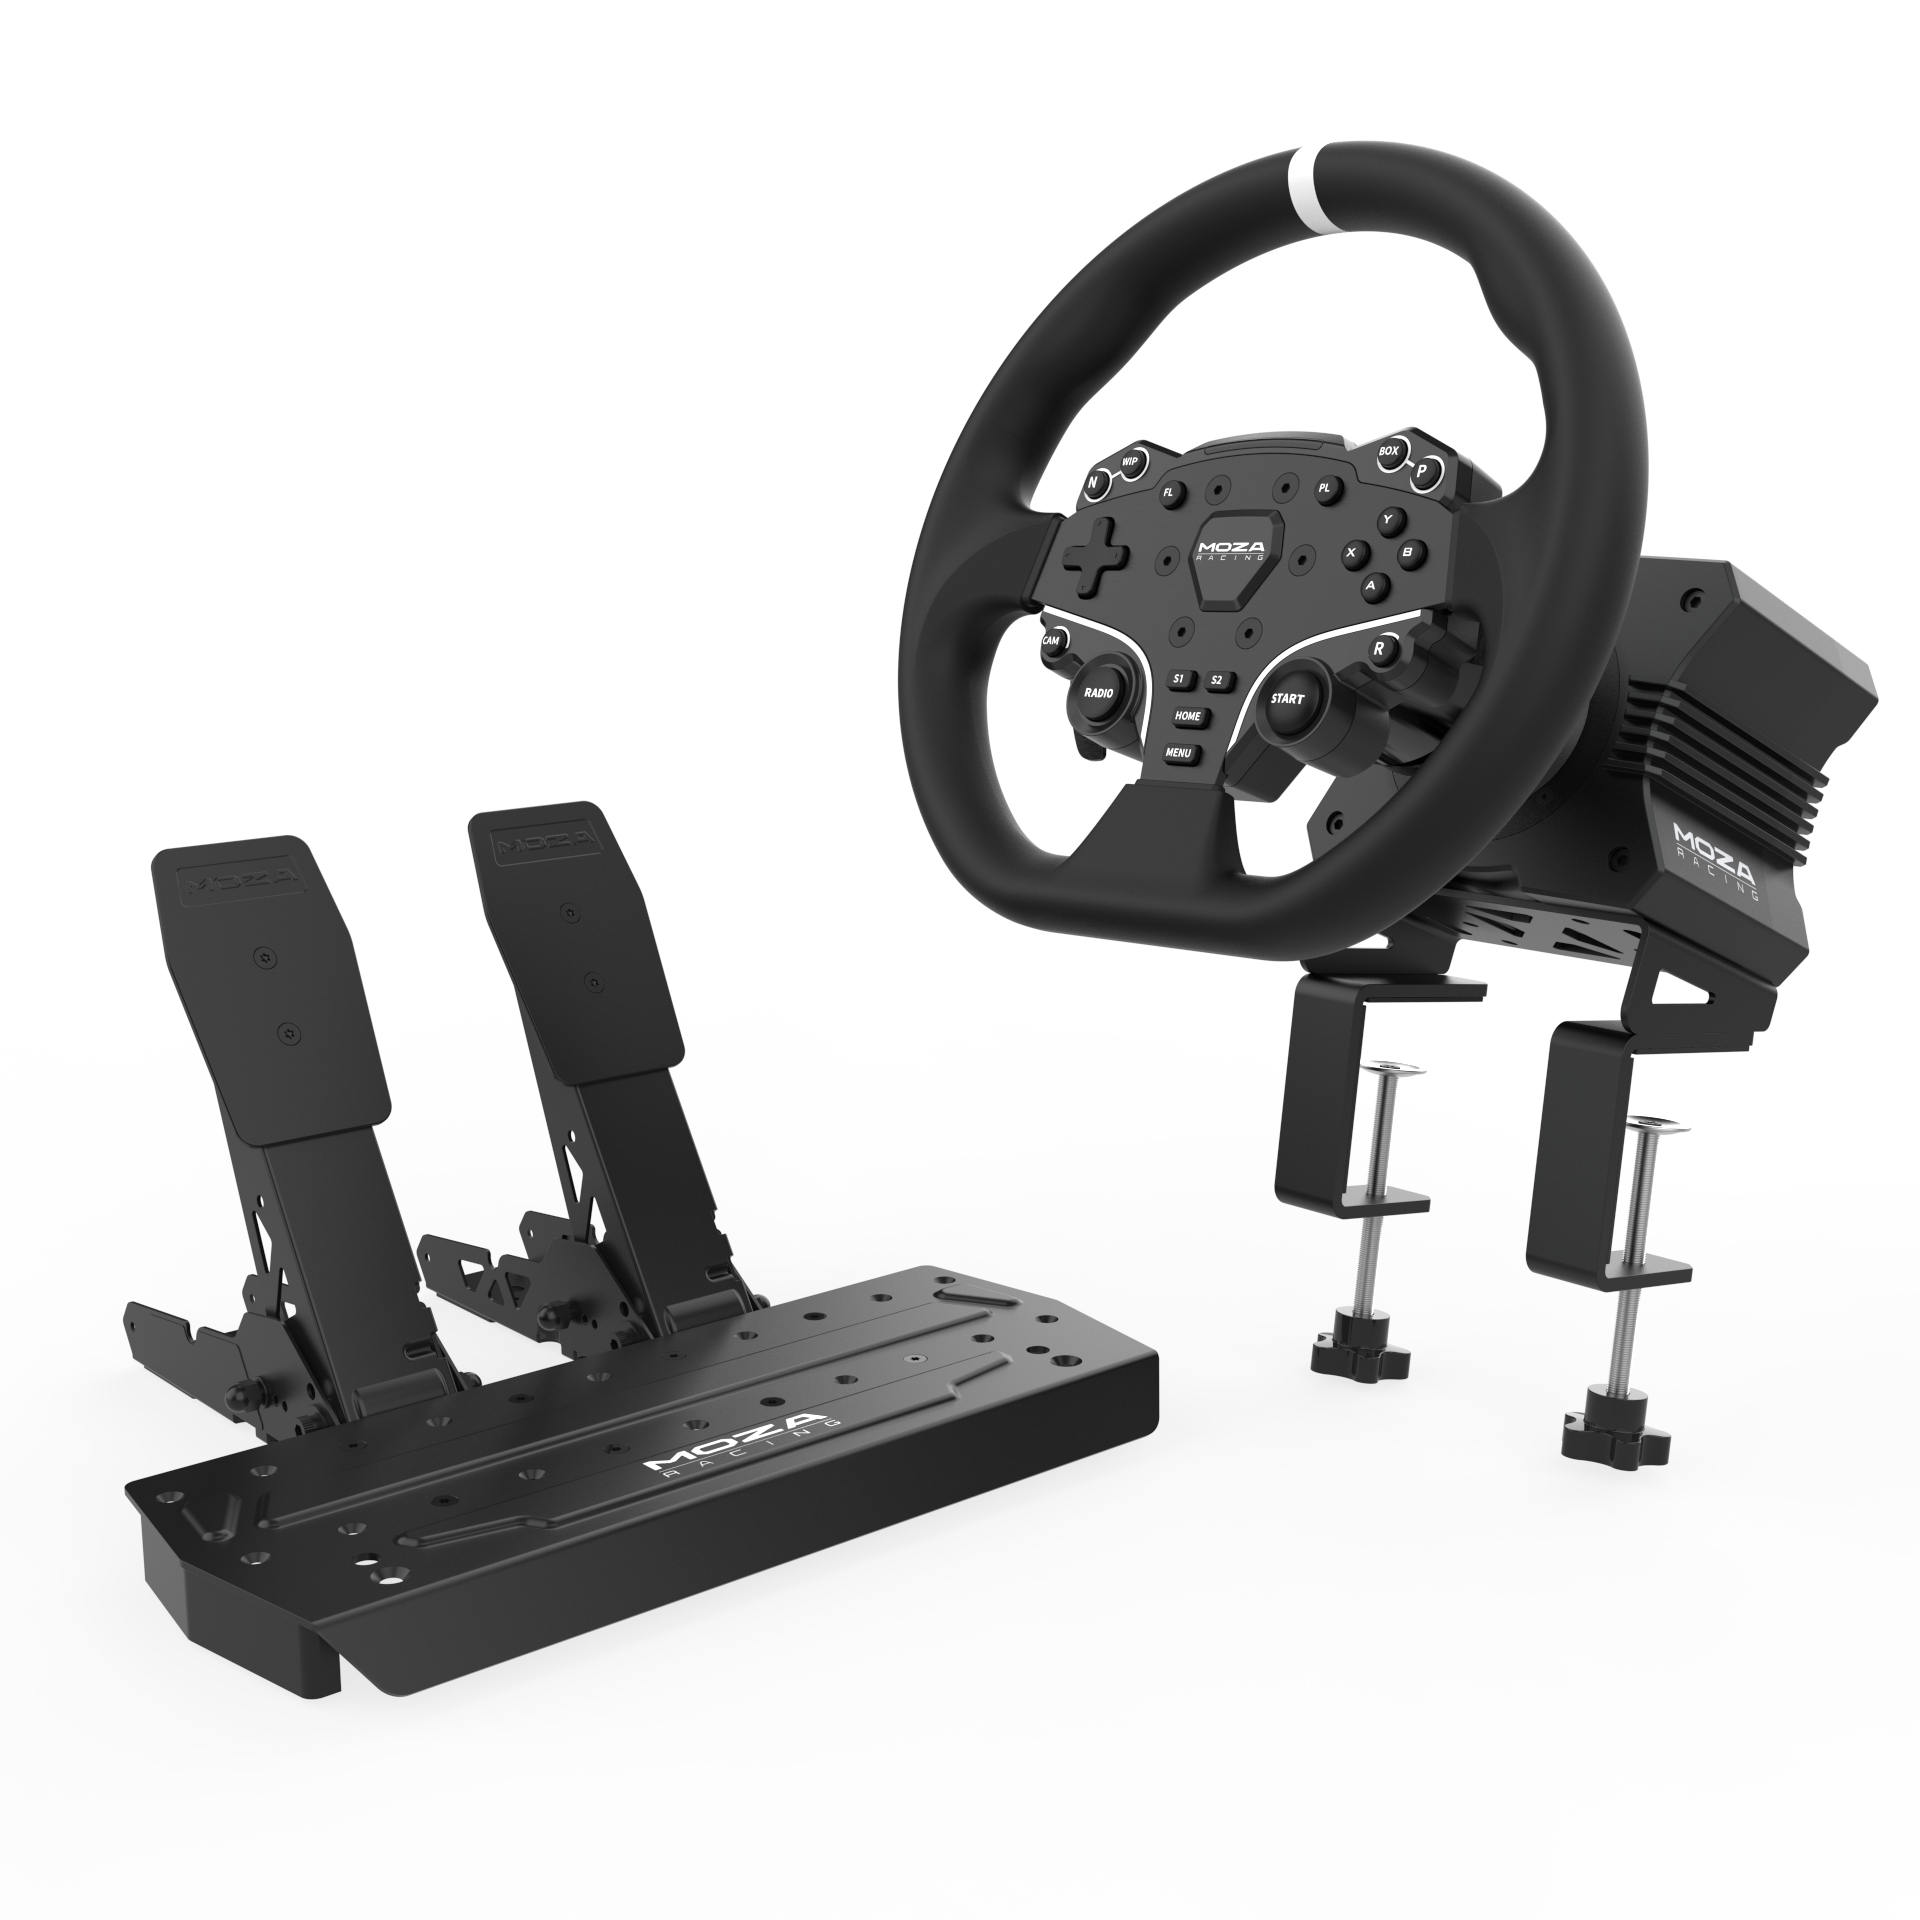 weduwe Gasvormig Effectief RSeat Europe SimracingMoza R5 Simulator Bundle - Moza R5 Simulator  BundleRigs and cockpits for direct drive wheels